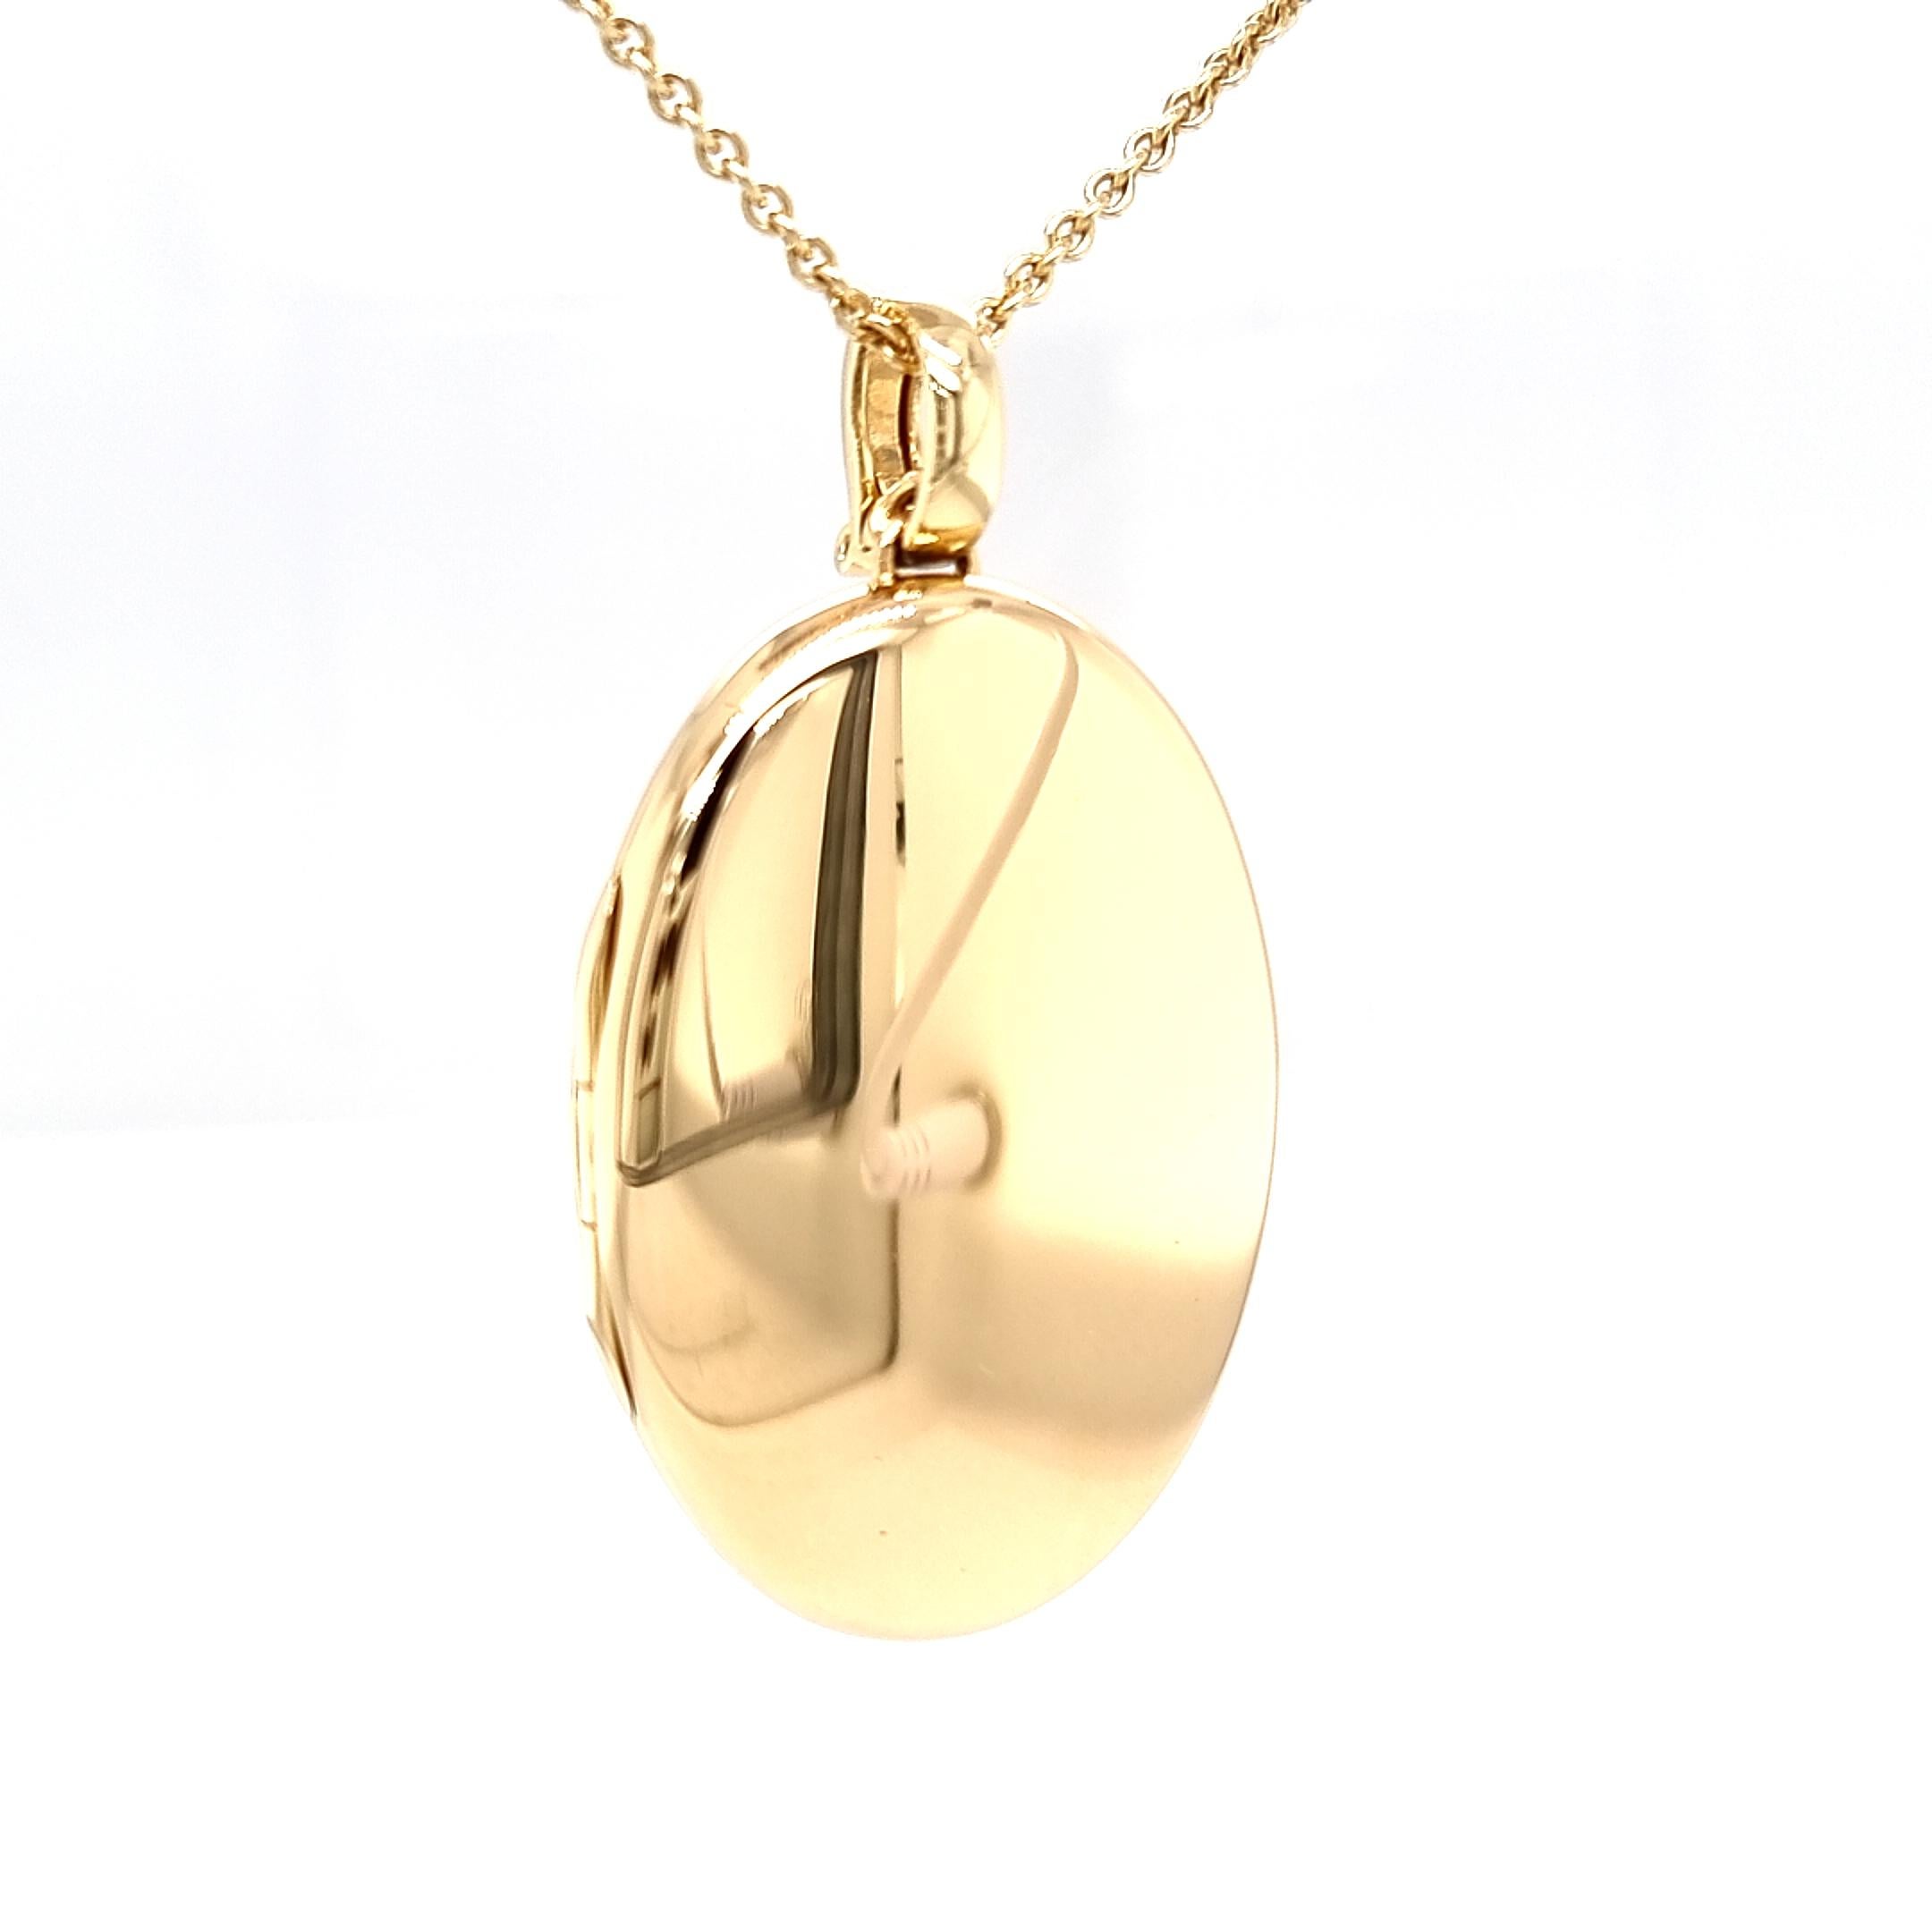 Victor Mayer oval locket pendant necklace [solid make] and enamel link chain, 18k yellow gold, Hallmark Collection, measurements app. 40 mm x 30 mm

About the creator Victor Mayer
Victor Mayer is internationally renowned for elegant timeless designs